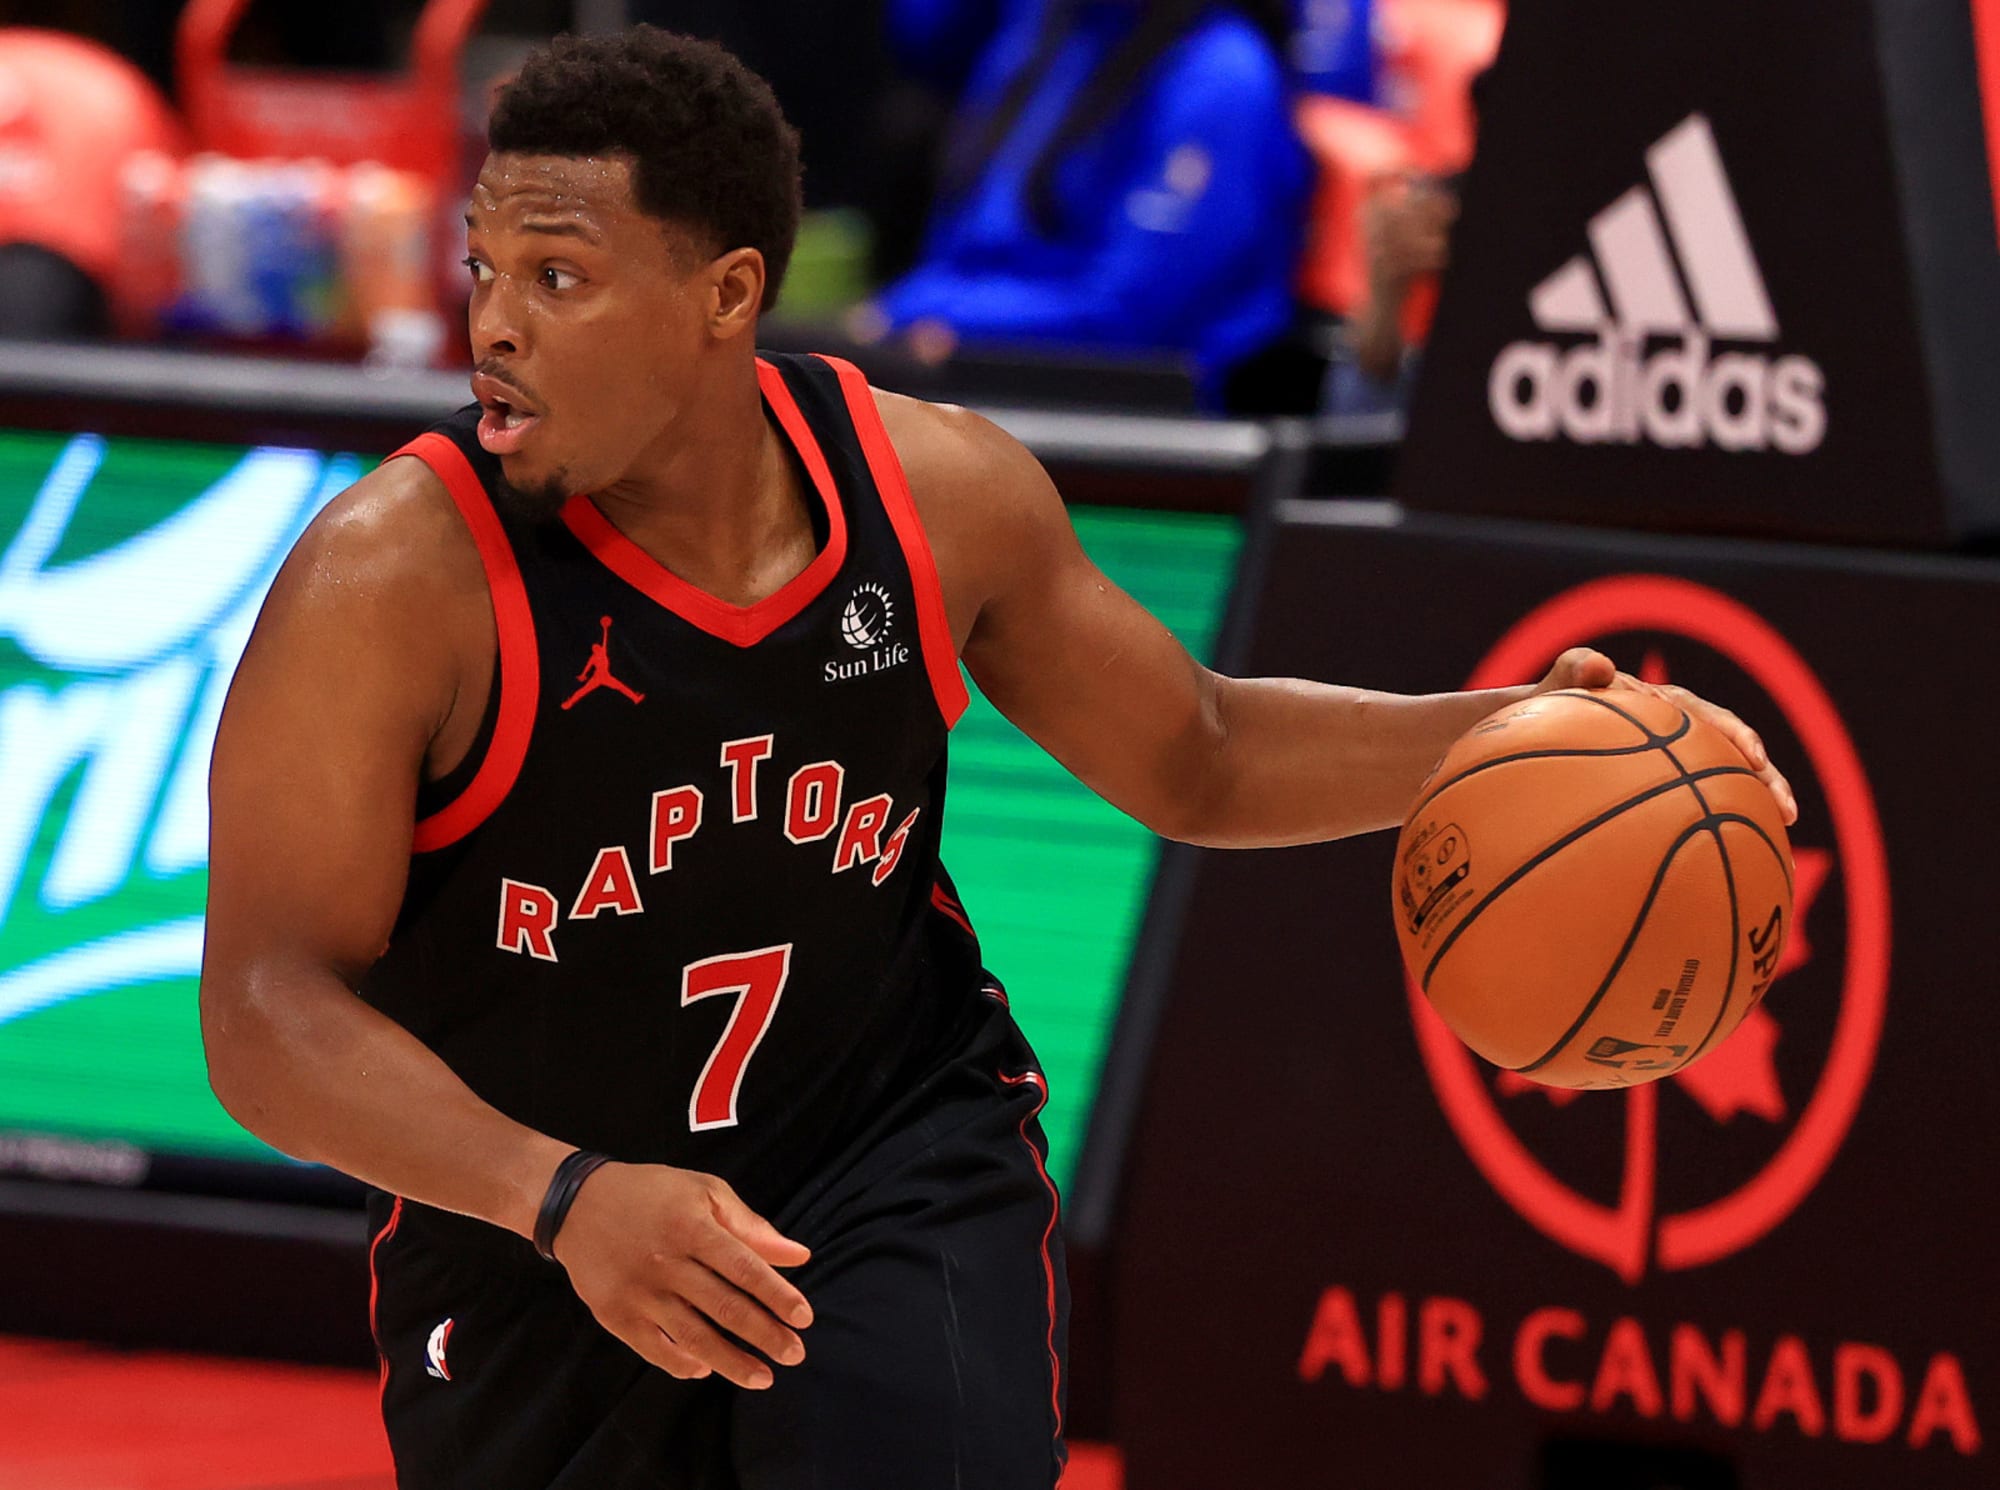 Raptors rumors: Latest buzz suggests Kyle Lowry trade is coming